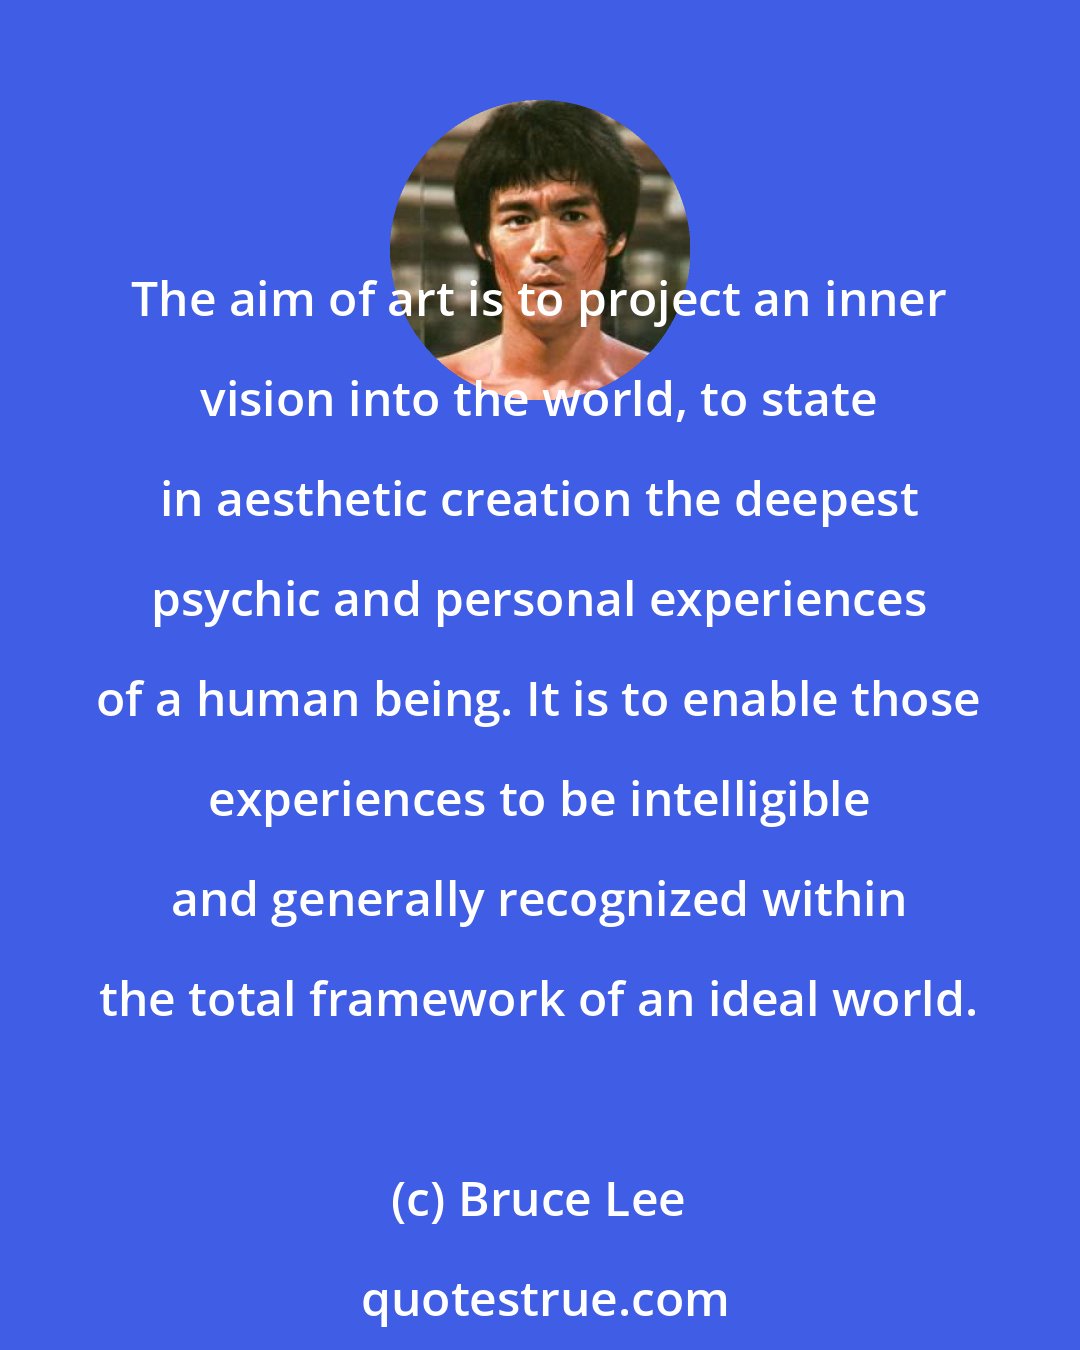 Bruce Lee: The aim of art is to project an inner vision into the world, to state in aesthetic creation the deepest psychic and personal experiences of a human being. It is to enable those experiences to be intelligible and generally recognized within the total framework of an ideal world.